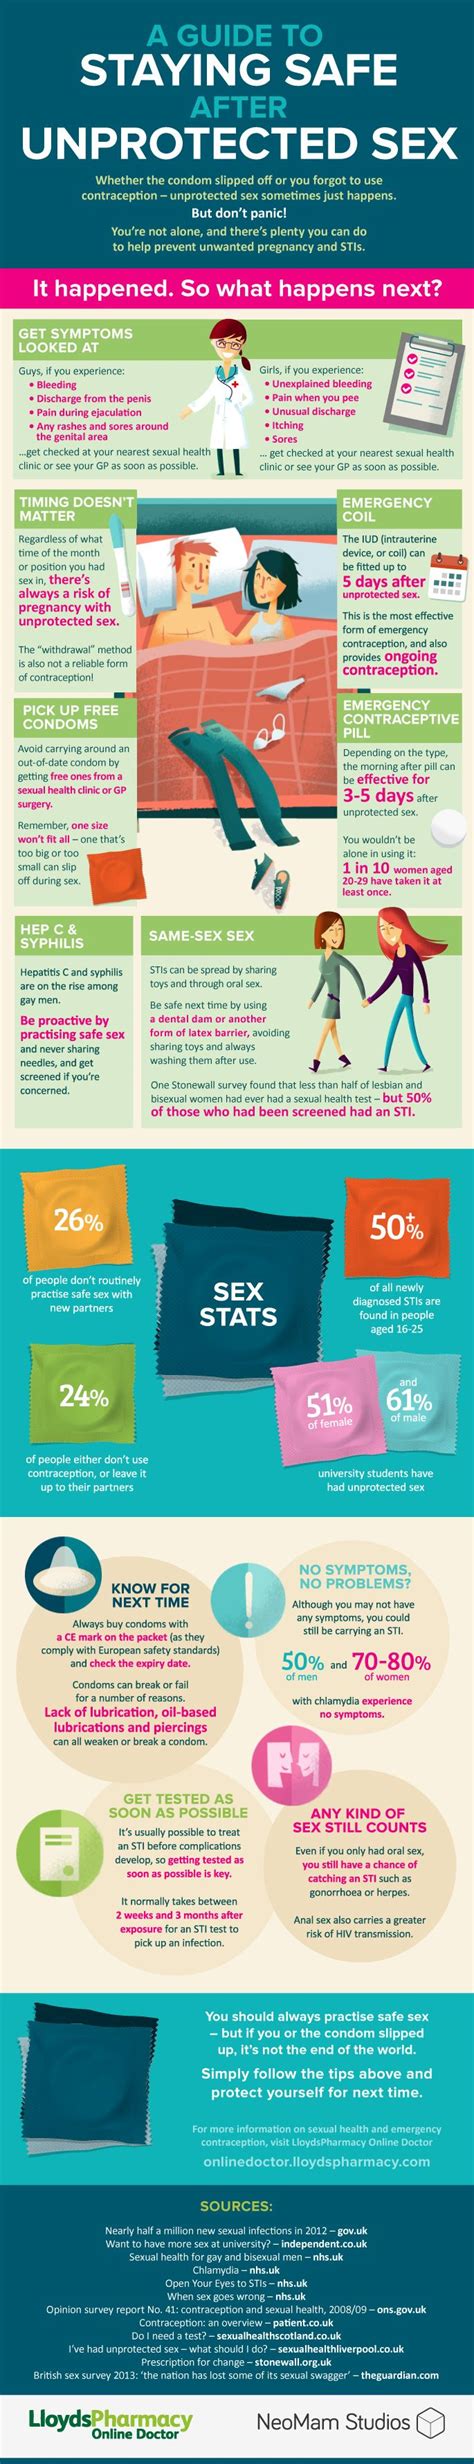 A Guide To Staying Safe After Unprotected Sex Infographic